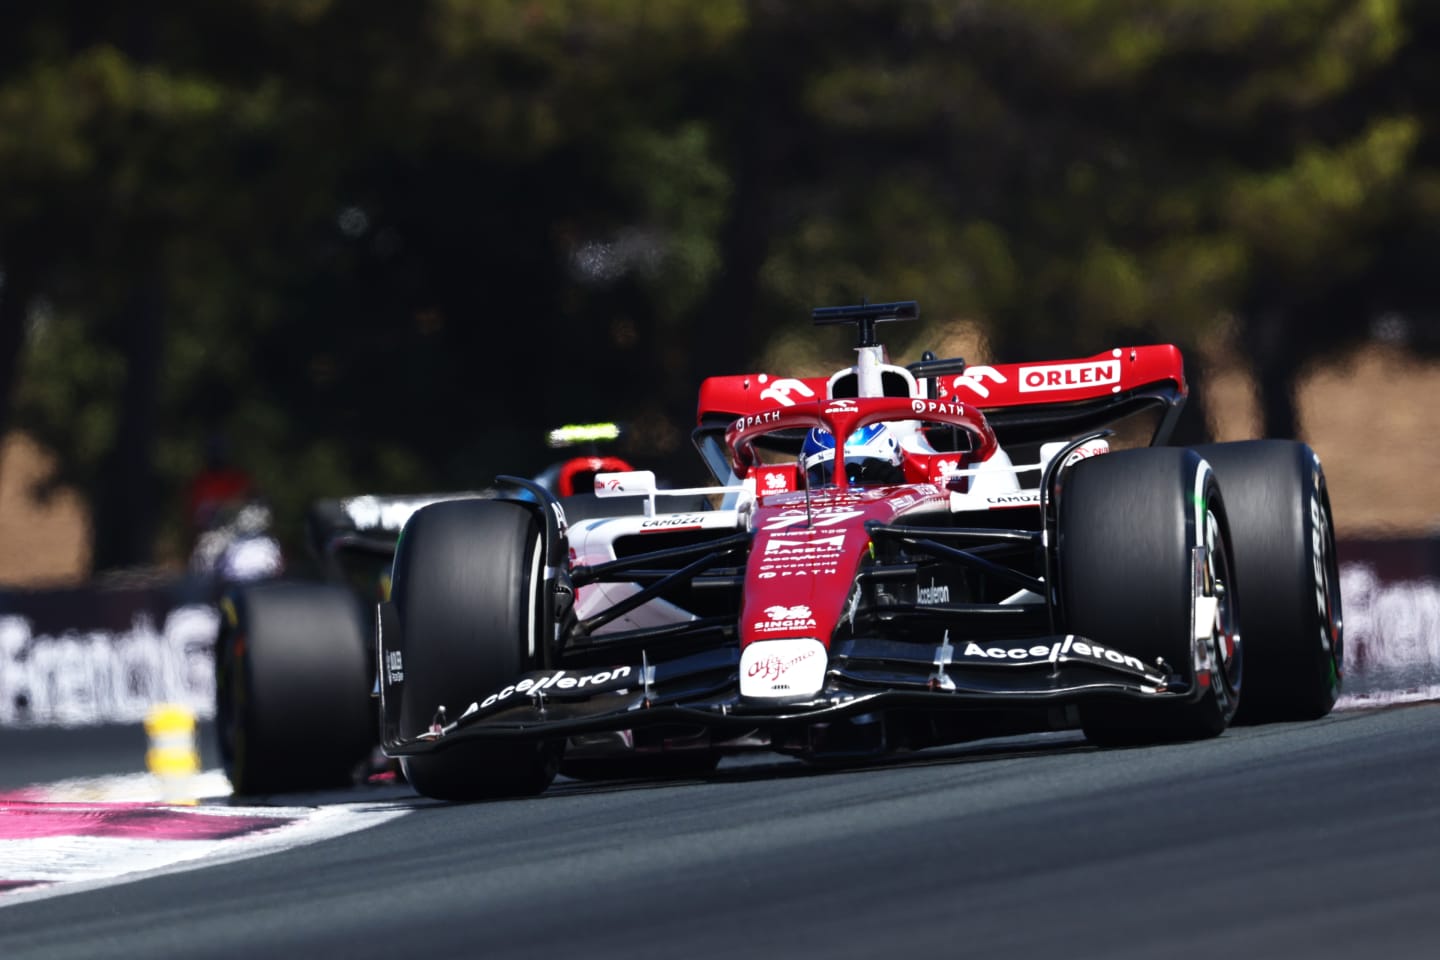 LE CASTELLET, FRANCE - JULY 24: Valtteri Bottas of Finland driving the (77) Alfa Romeo F1 C42 Ferrari on track during the F1 Grand Prix of France at Circuit Paul Ricard on July 24, 2022 in Le Castellet, France. (Photo by Clive Rose/Getty Images)